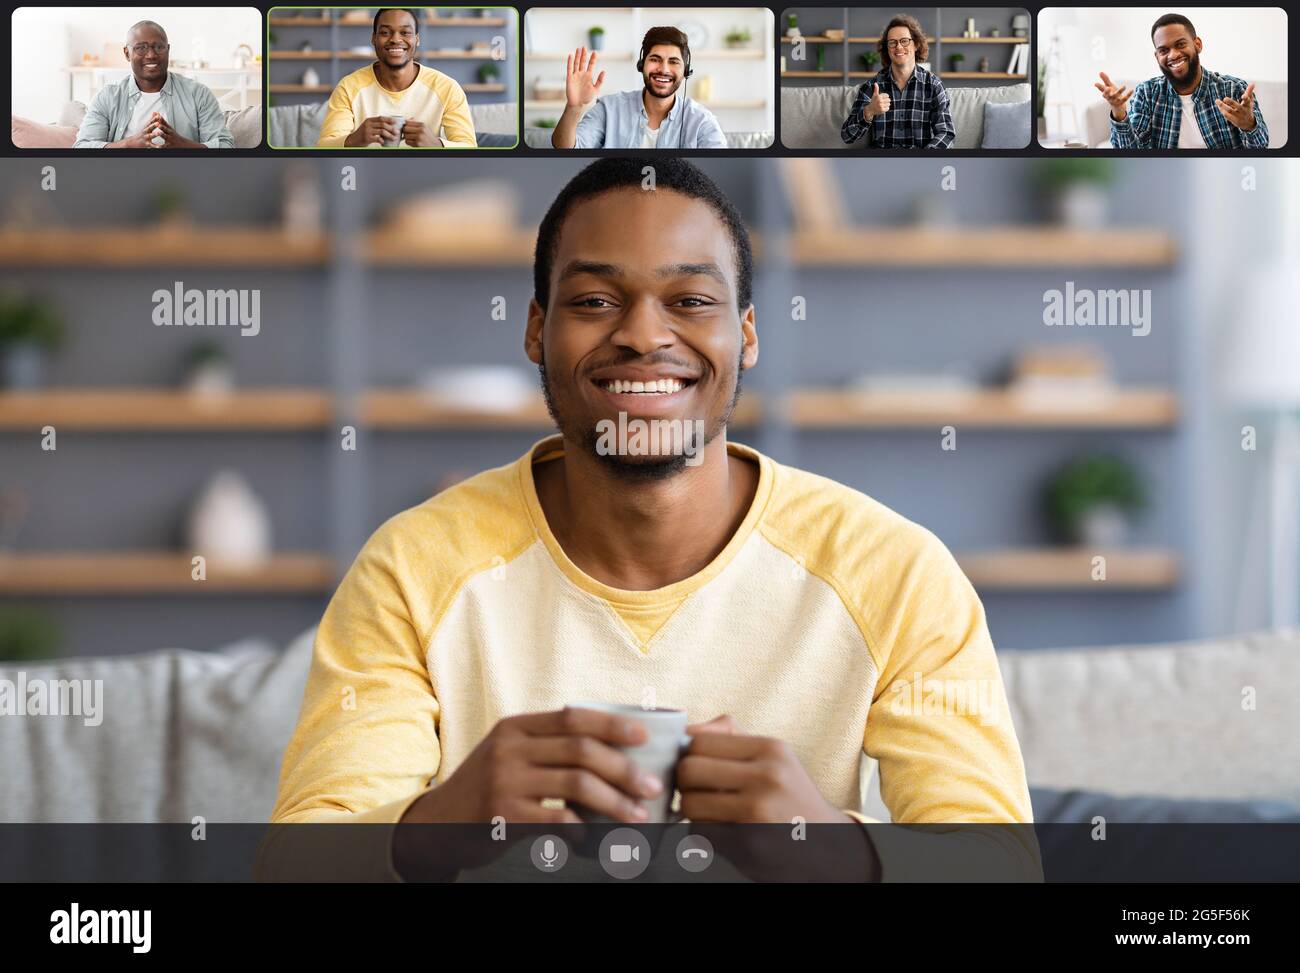 Laptop webcam screen view of multiethnic men contacting distantly by  videoconference. Smiling diverse friends making video call enjoying  communication Stock Photo - Alamy